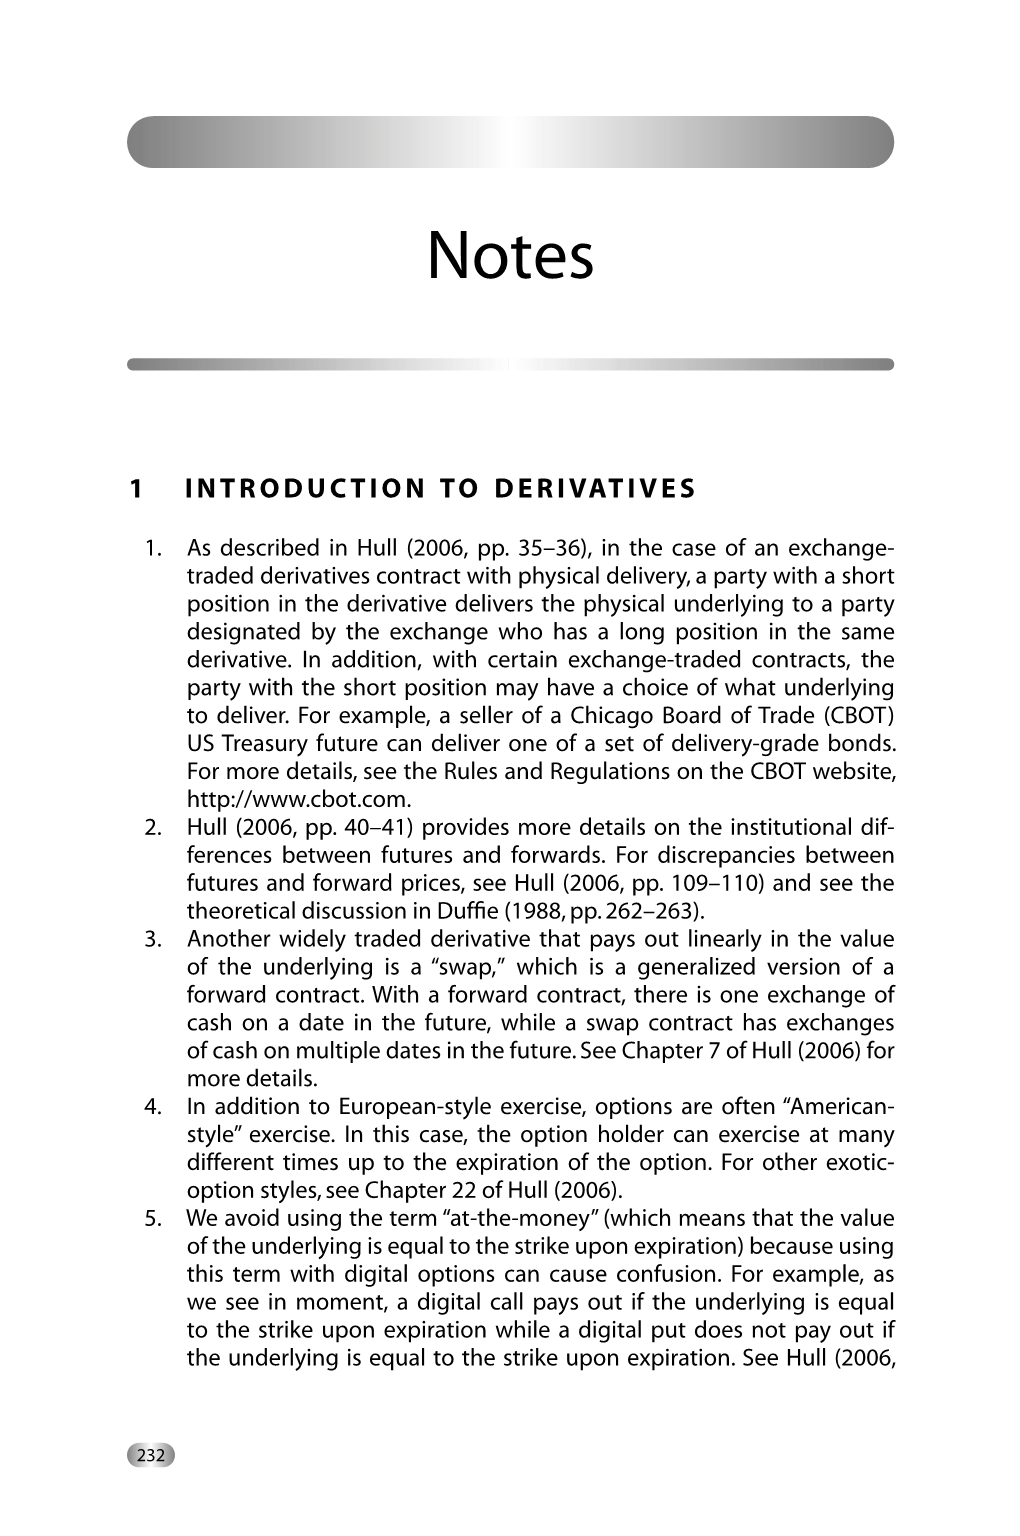 1 Introduction to Derivatives